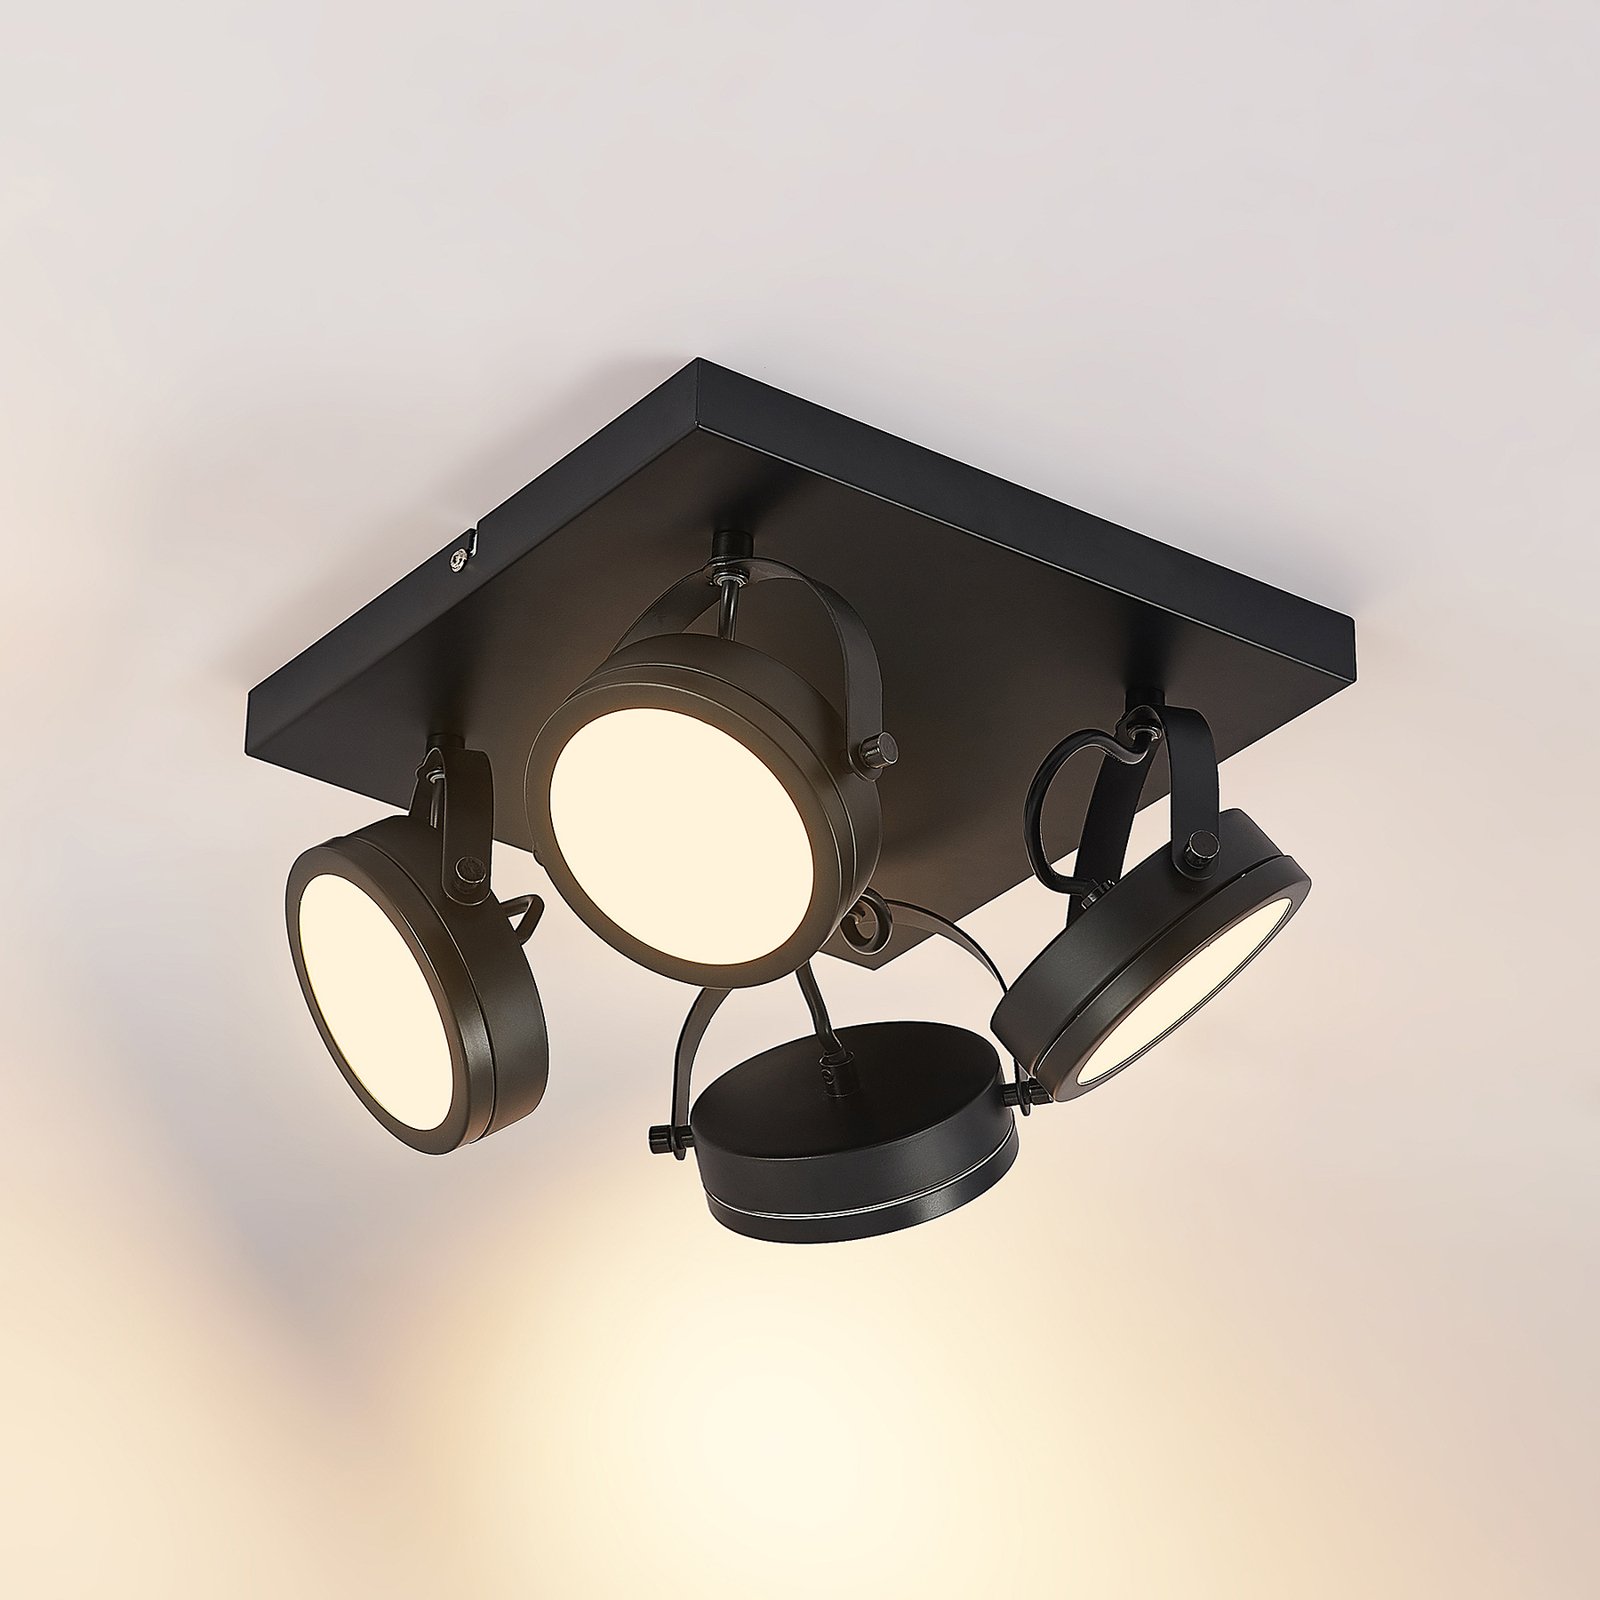 Lindby Omila spot sufitowy LED, 4-punktowy